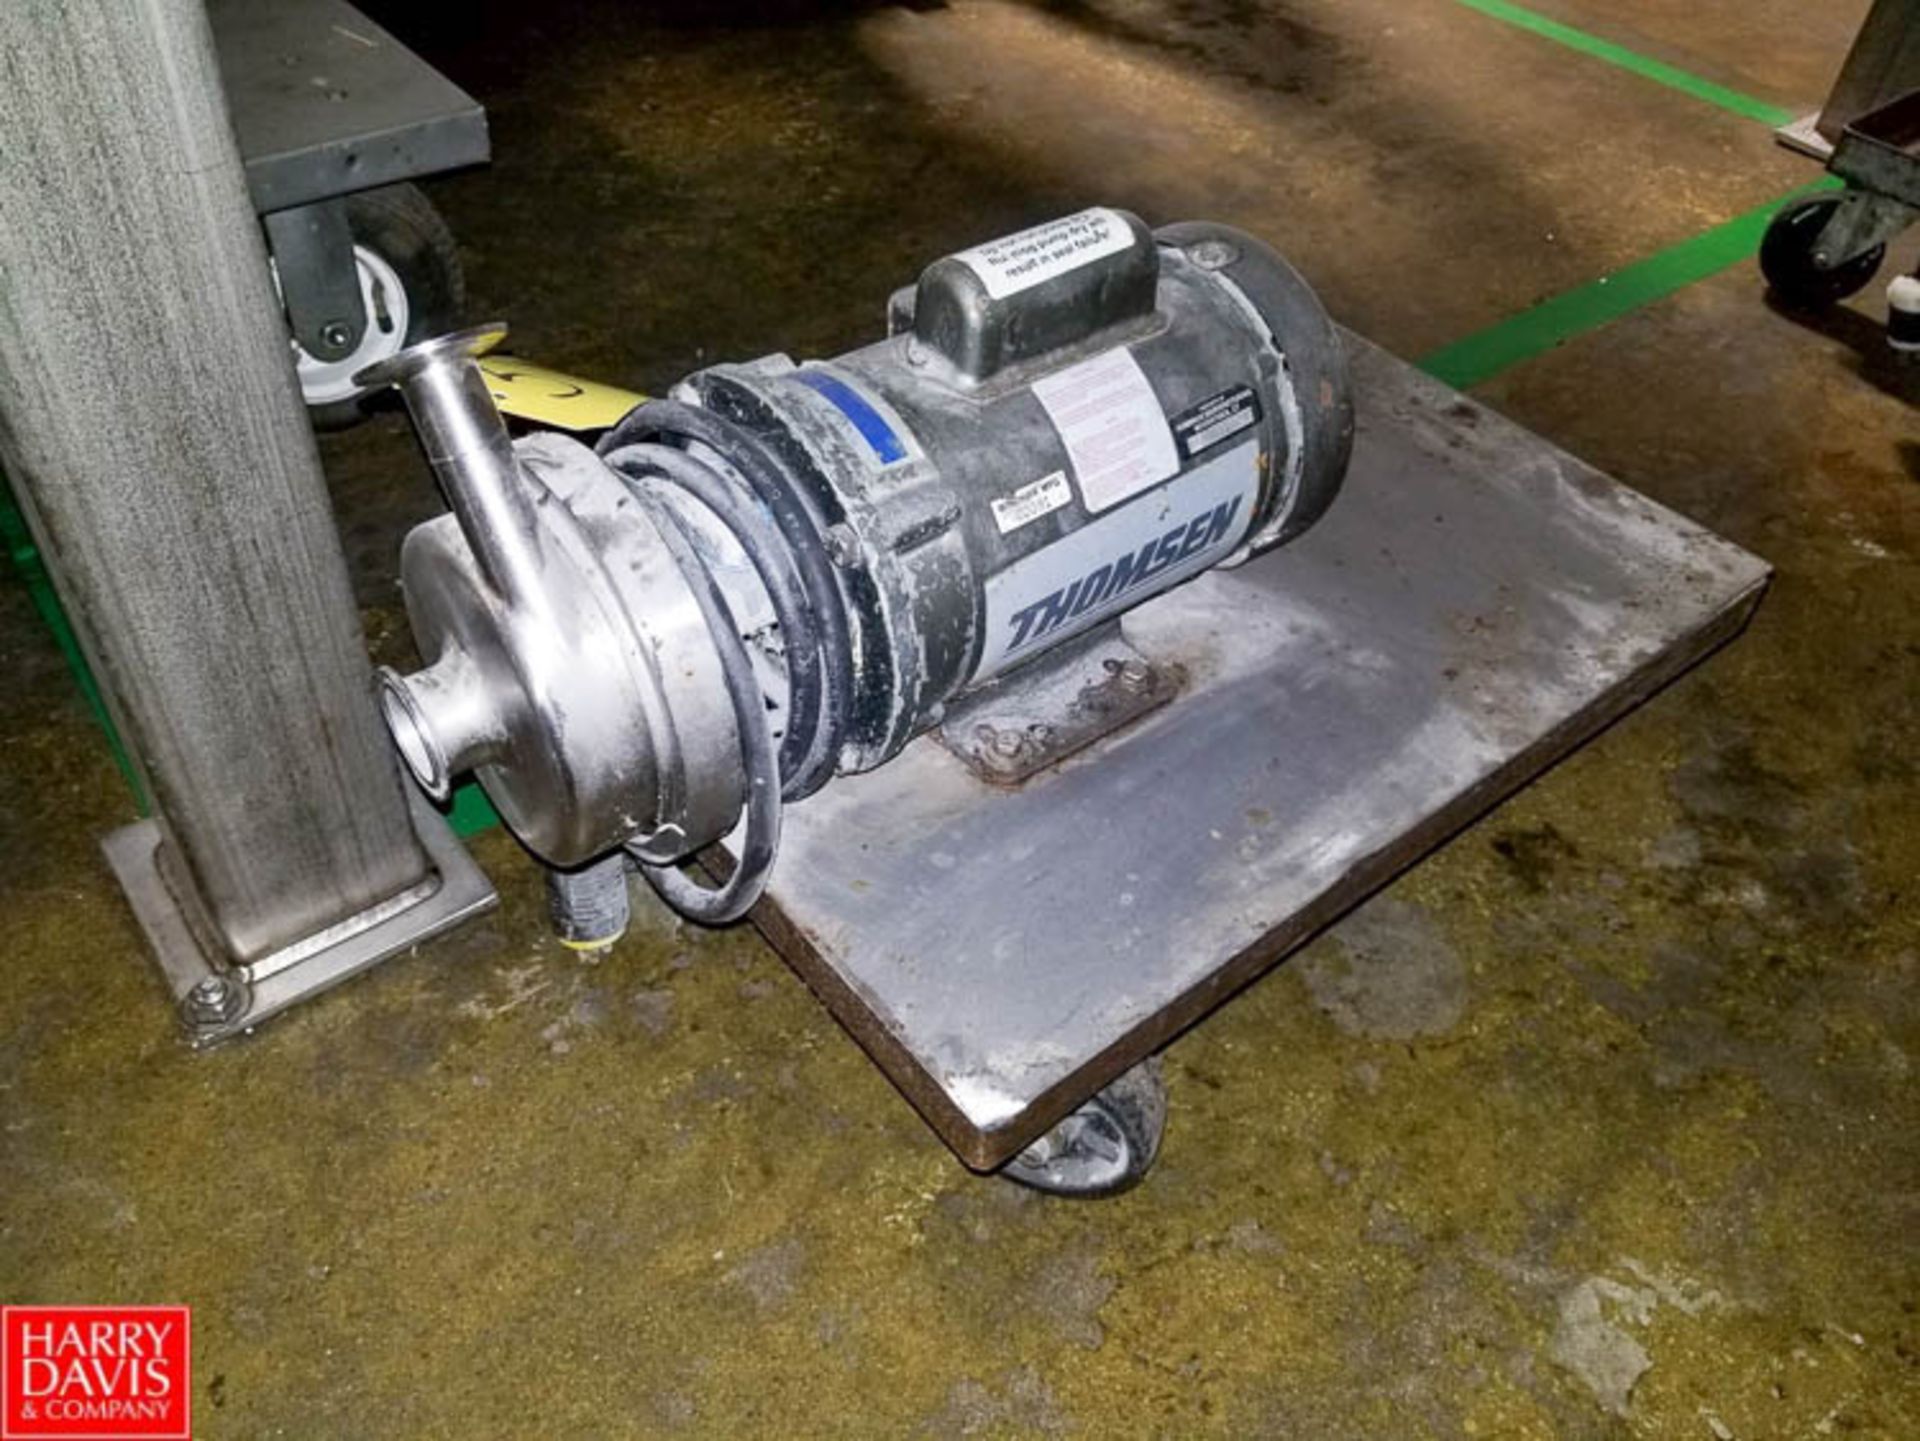 Thomsen 1 HP Pump with S/S Head, Clamp Type Mounted On Cart Rigging Fee: $35